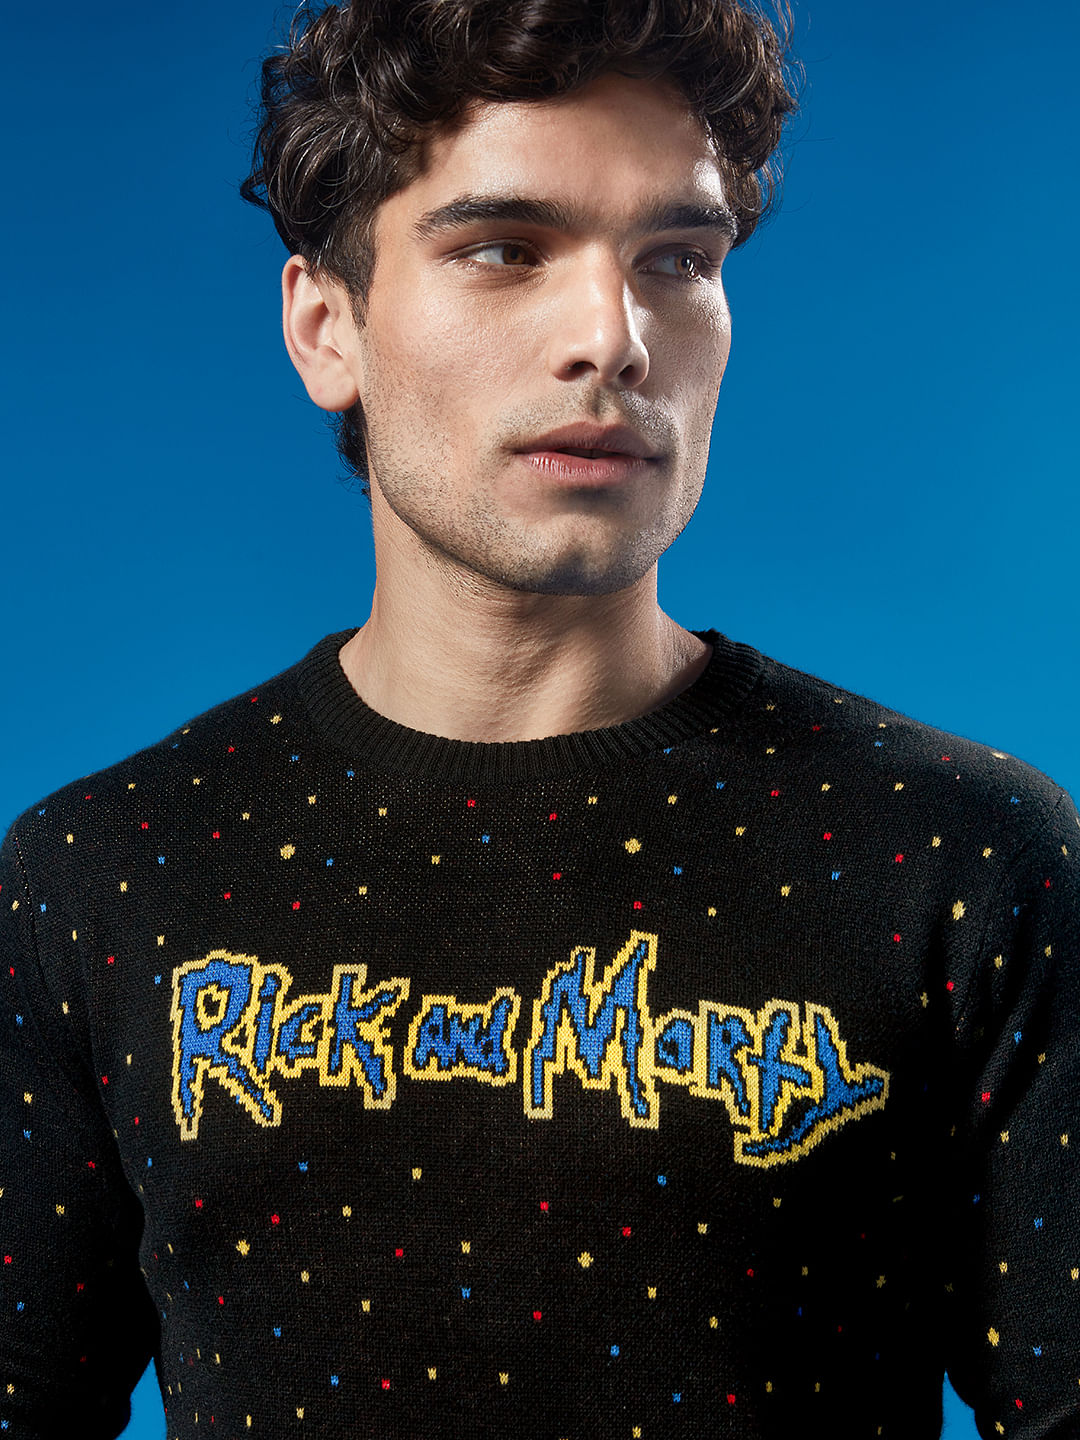 NEW & OFFICIAL! Rick And Morty 'Spaceship' Crew Neck Sweatshirt